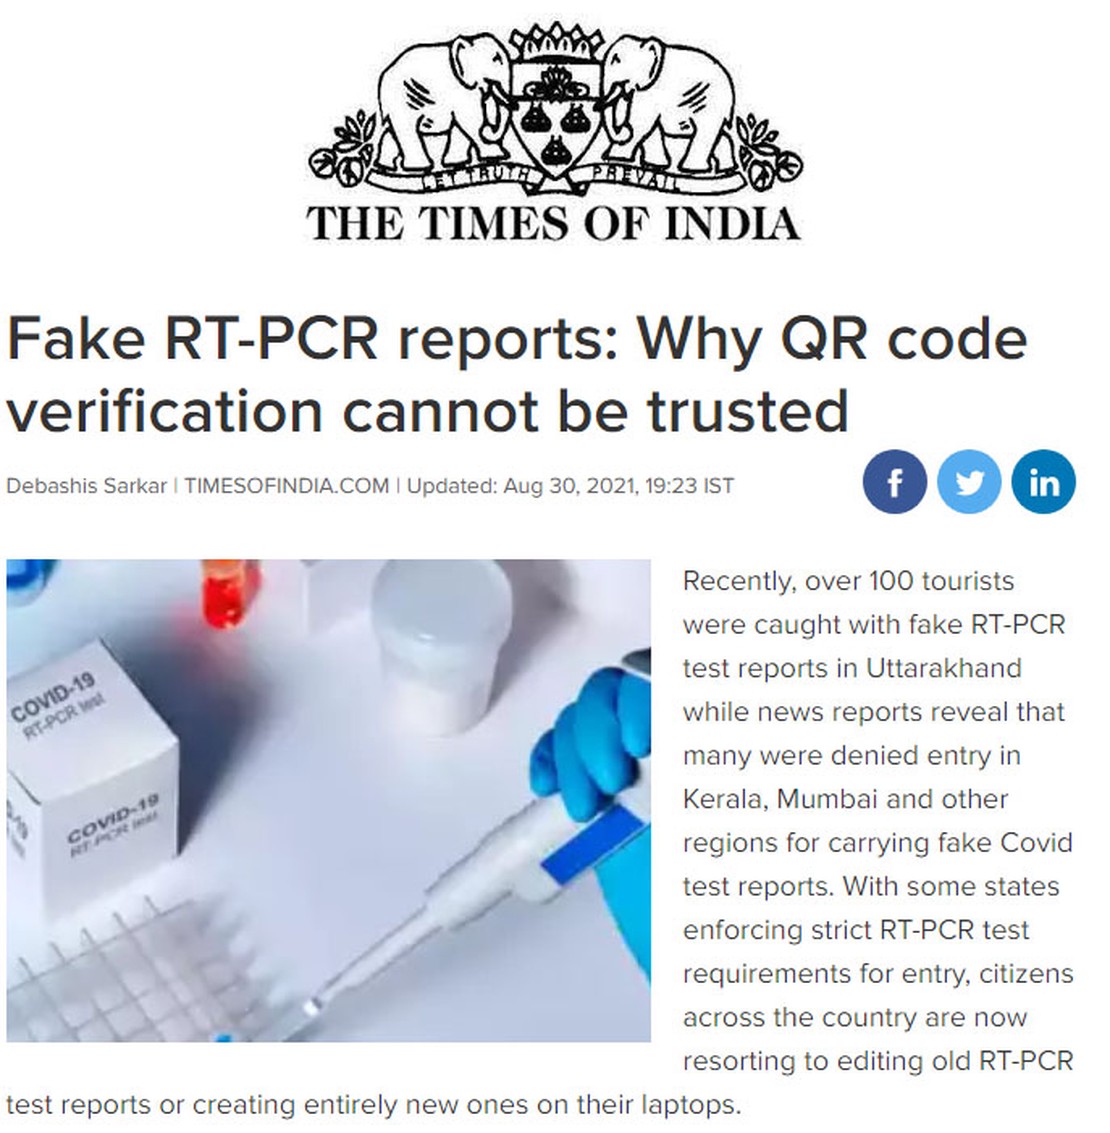 India's Tryst with Fake RT-PCR reports and Why regular QR doesn’t help